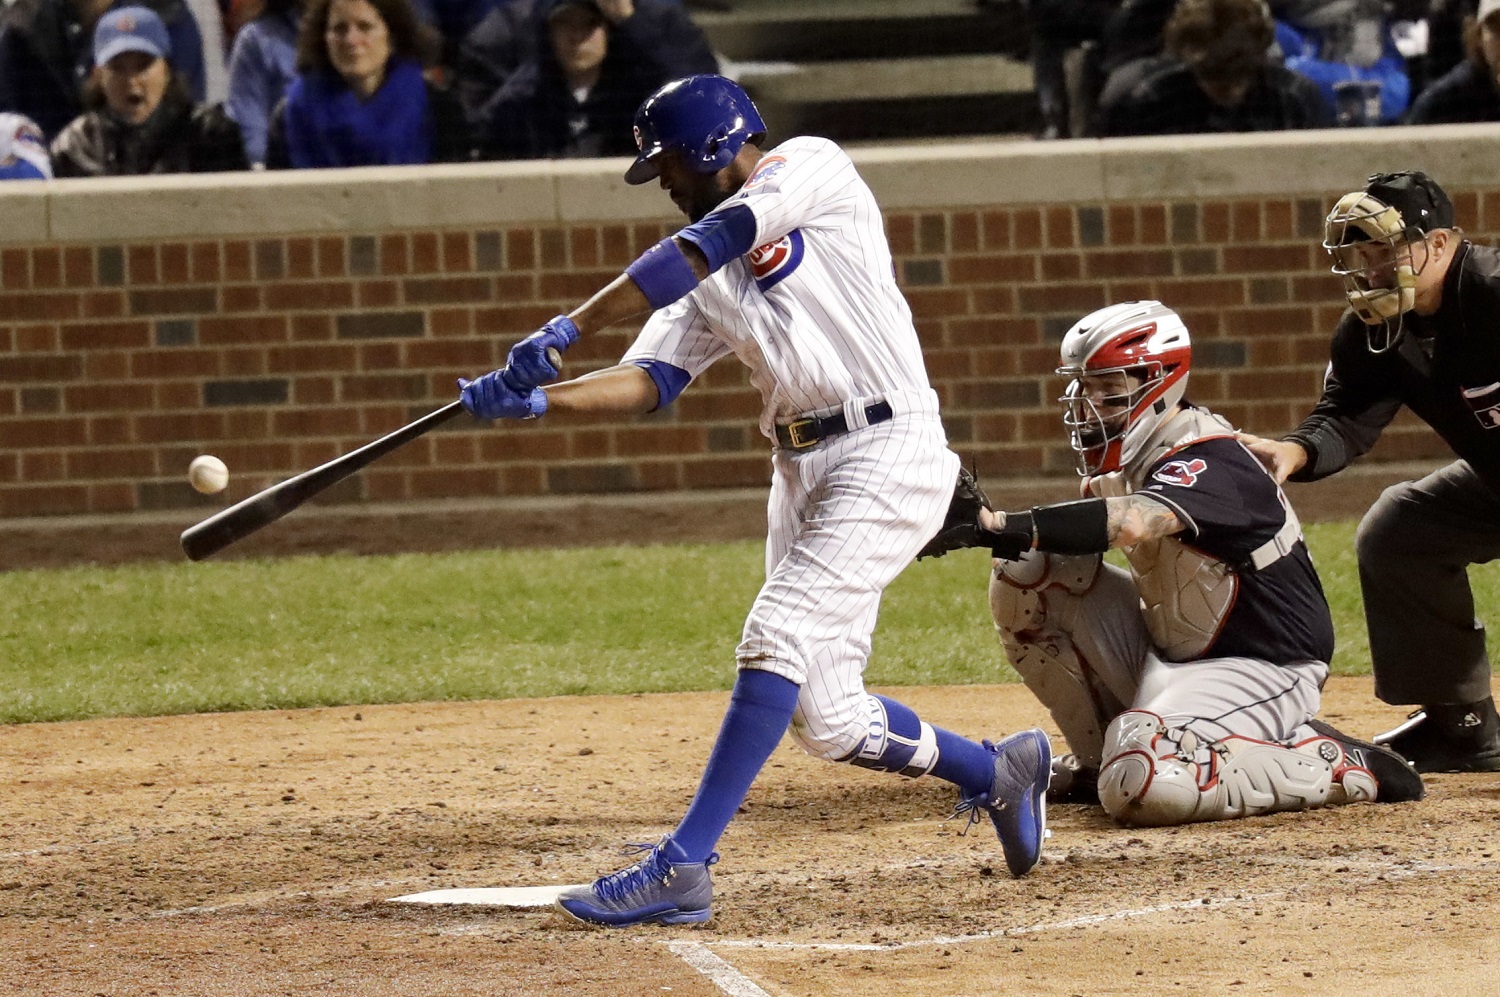 Chicago Cubs' Dexter Fowler hits a home run against the Cleveland Indians during the eighth inning of Game 4 of the Major League Baseball World Series Saturday, Oct. 29, 2016, in Chicago. (AP Photo/Charles Rex Arbogast)